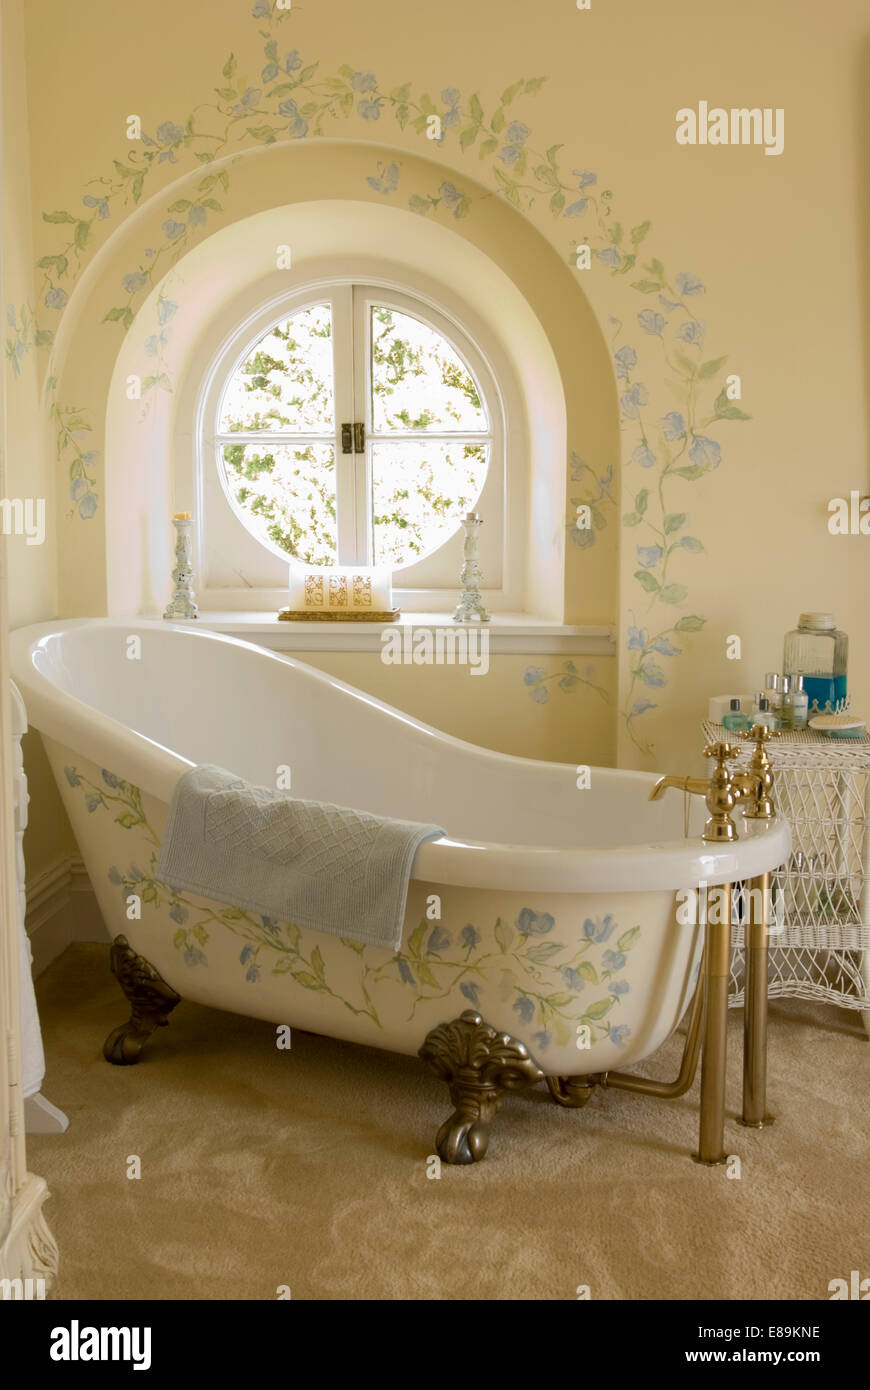 Cream bathroom with painted floral decoration on rolltop bath in front of circular window with matching decoration on wall Stock Photo